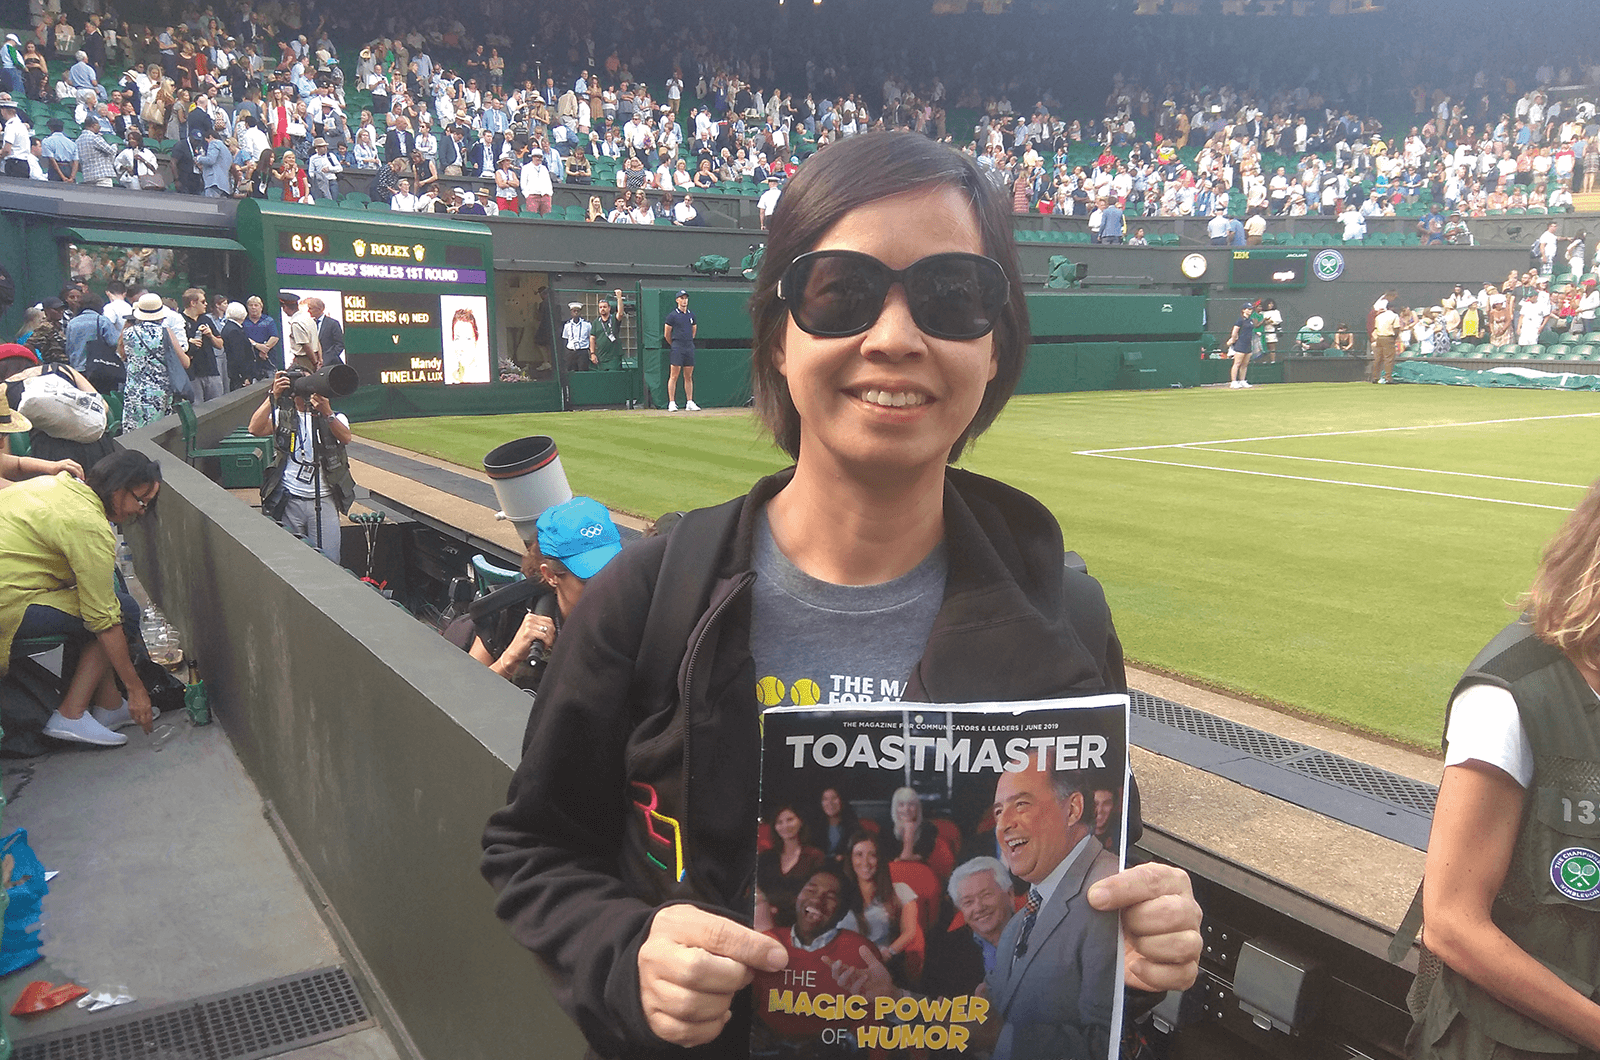 Olivia Tam of Mountain View, California, watches a tennis match in London, England, at Wimbledon, the oldest tennis tournament in the world. 